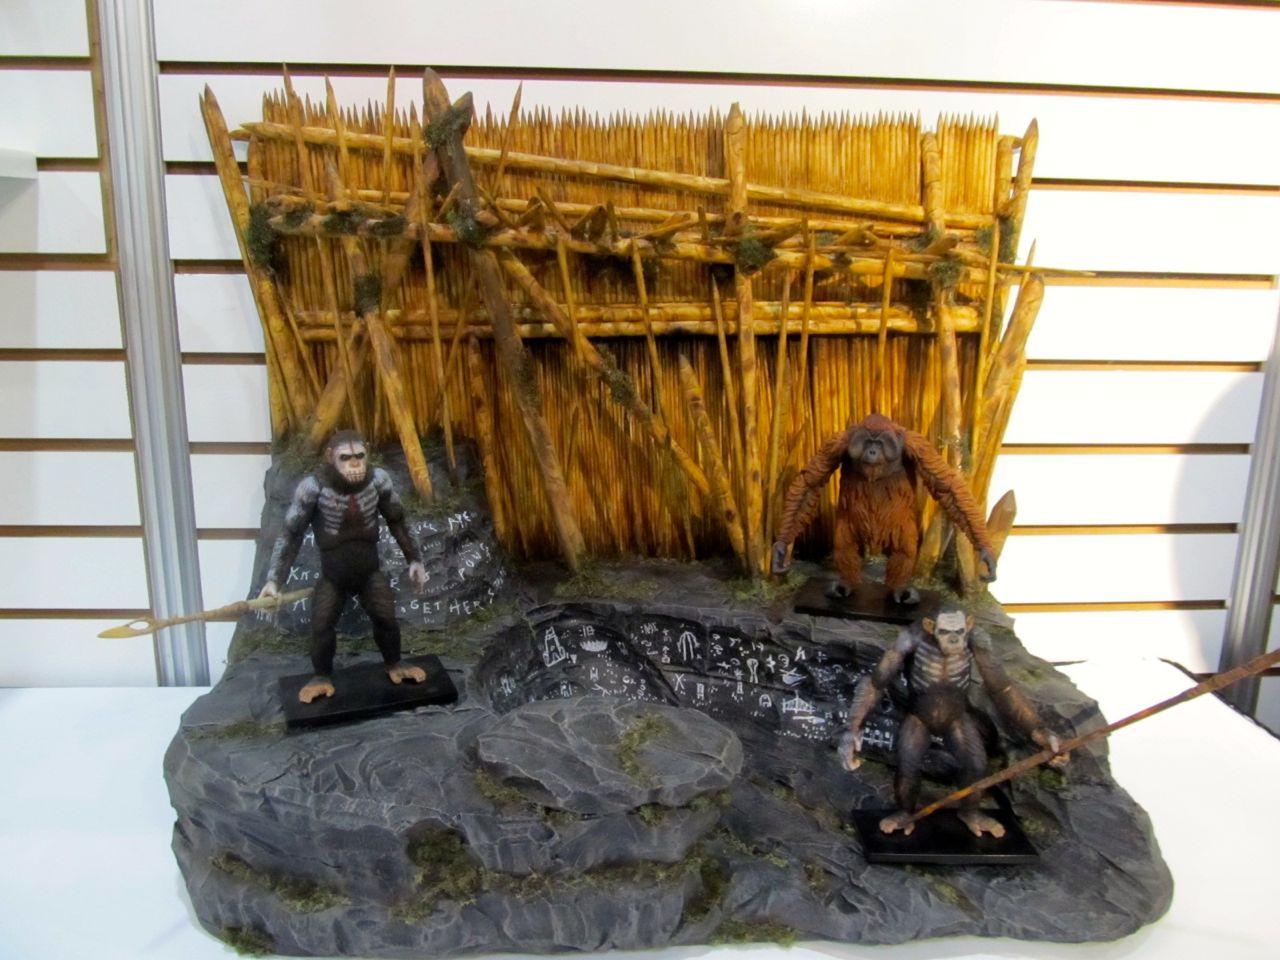 Hr_neca_dawn_of_the_planet_of_the_apes_3